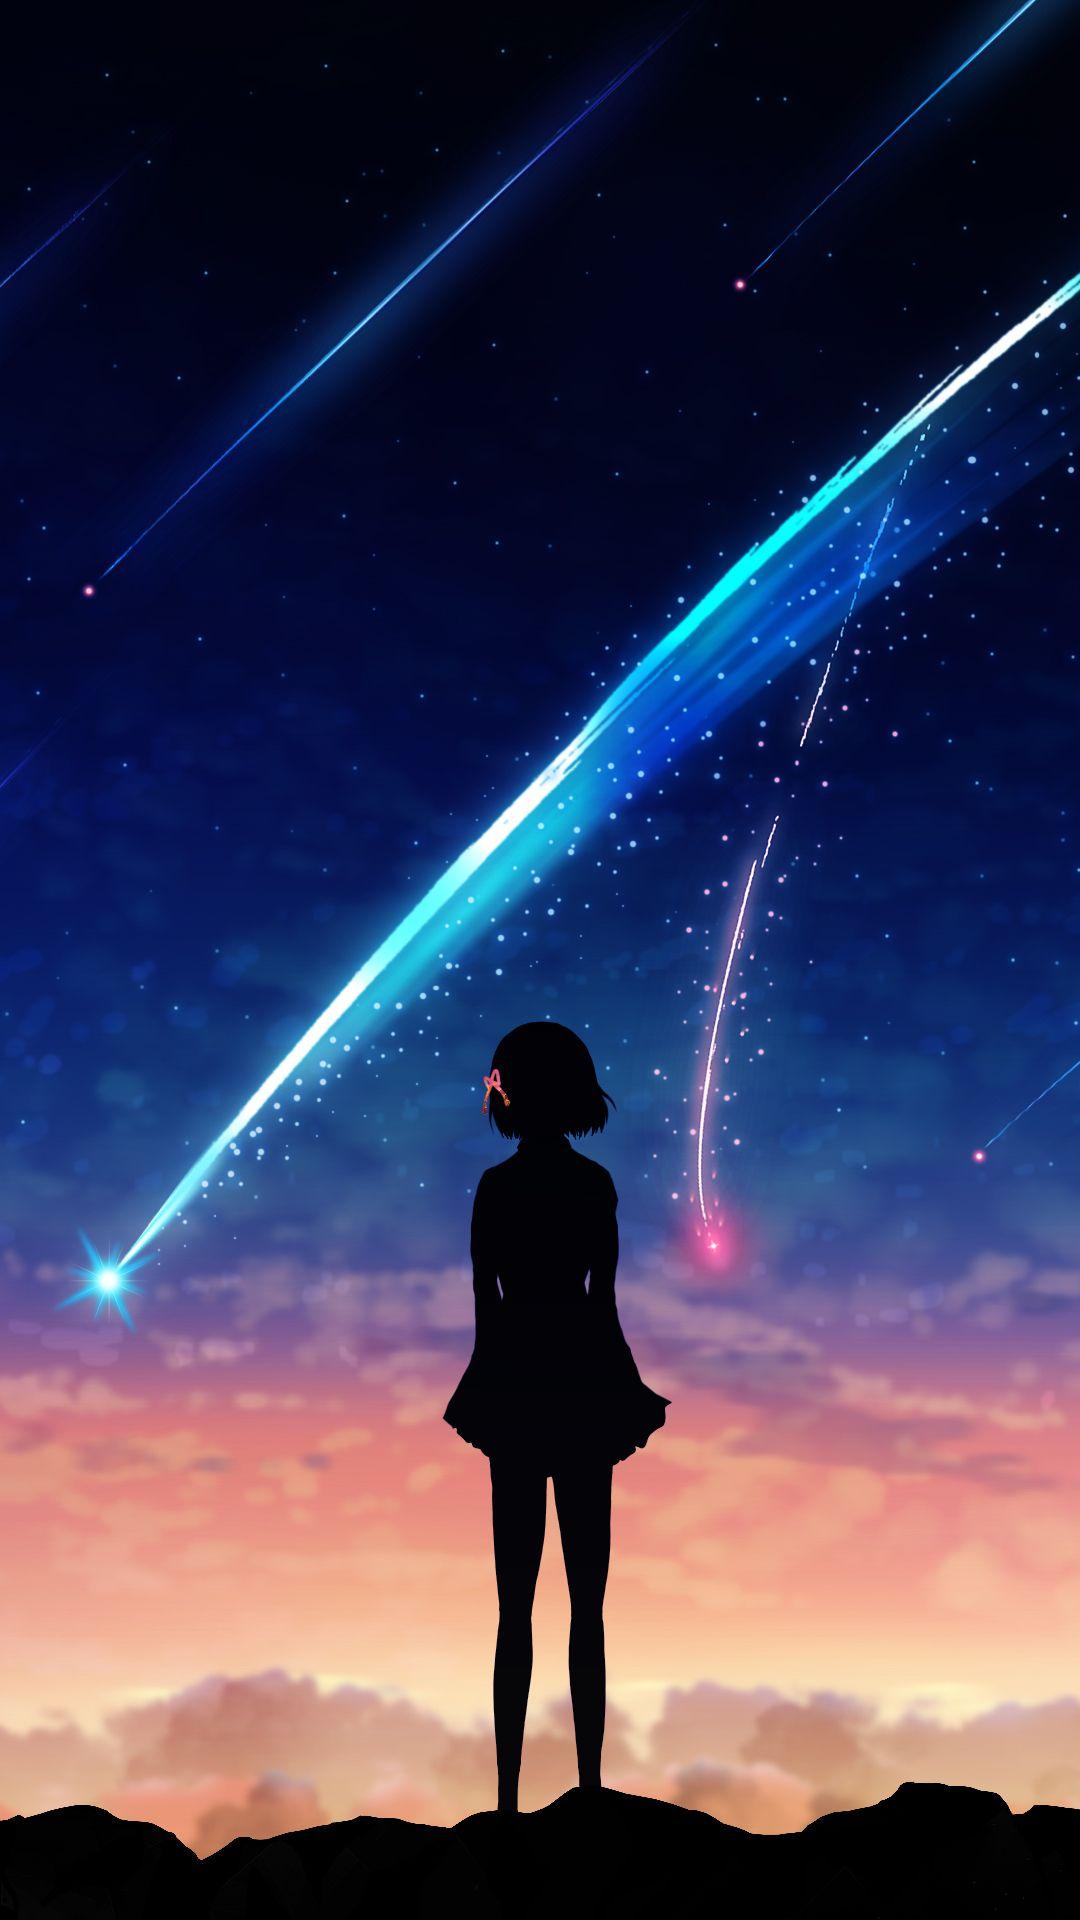 List of Best Anime Phone Wallpaper HD Today by mobile.alphacoders.com